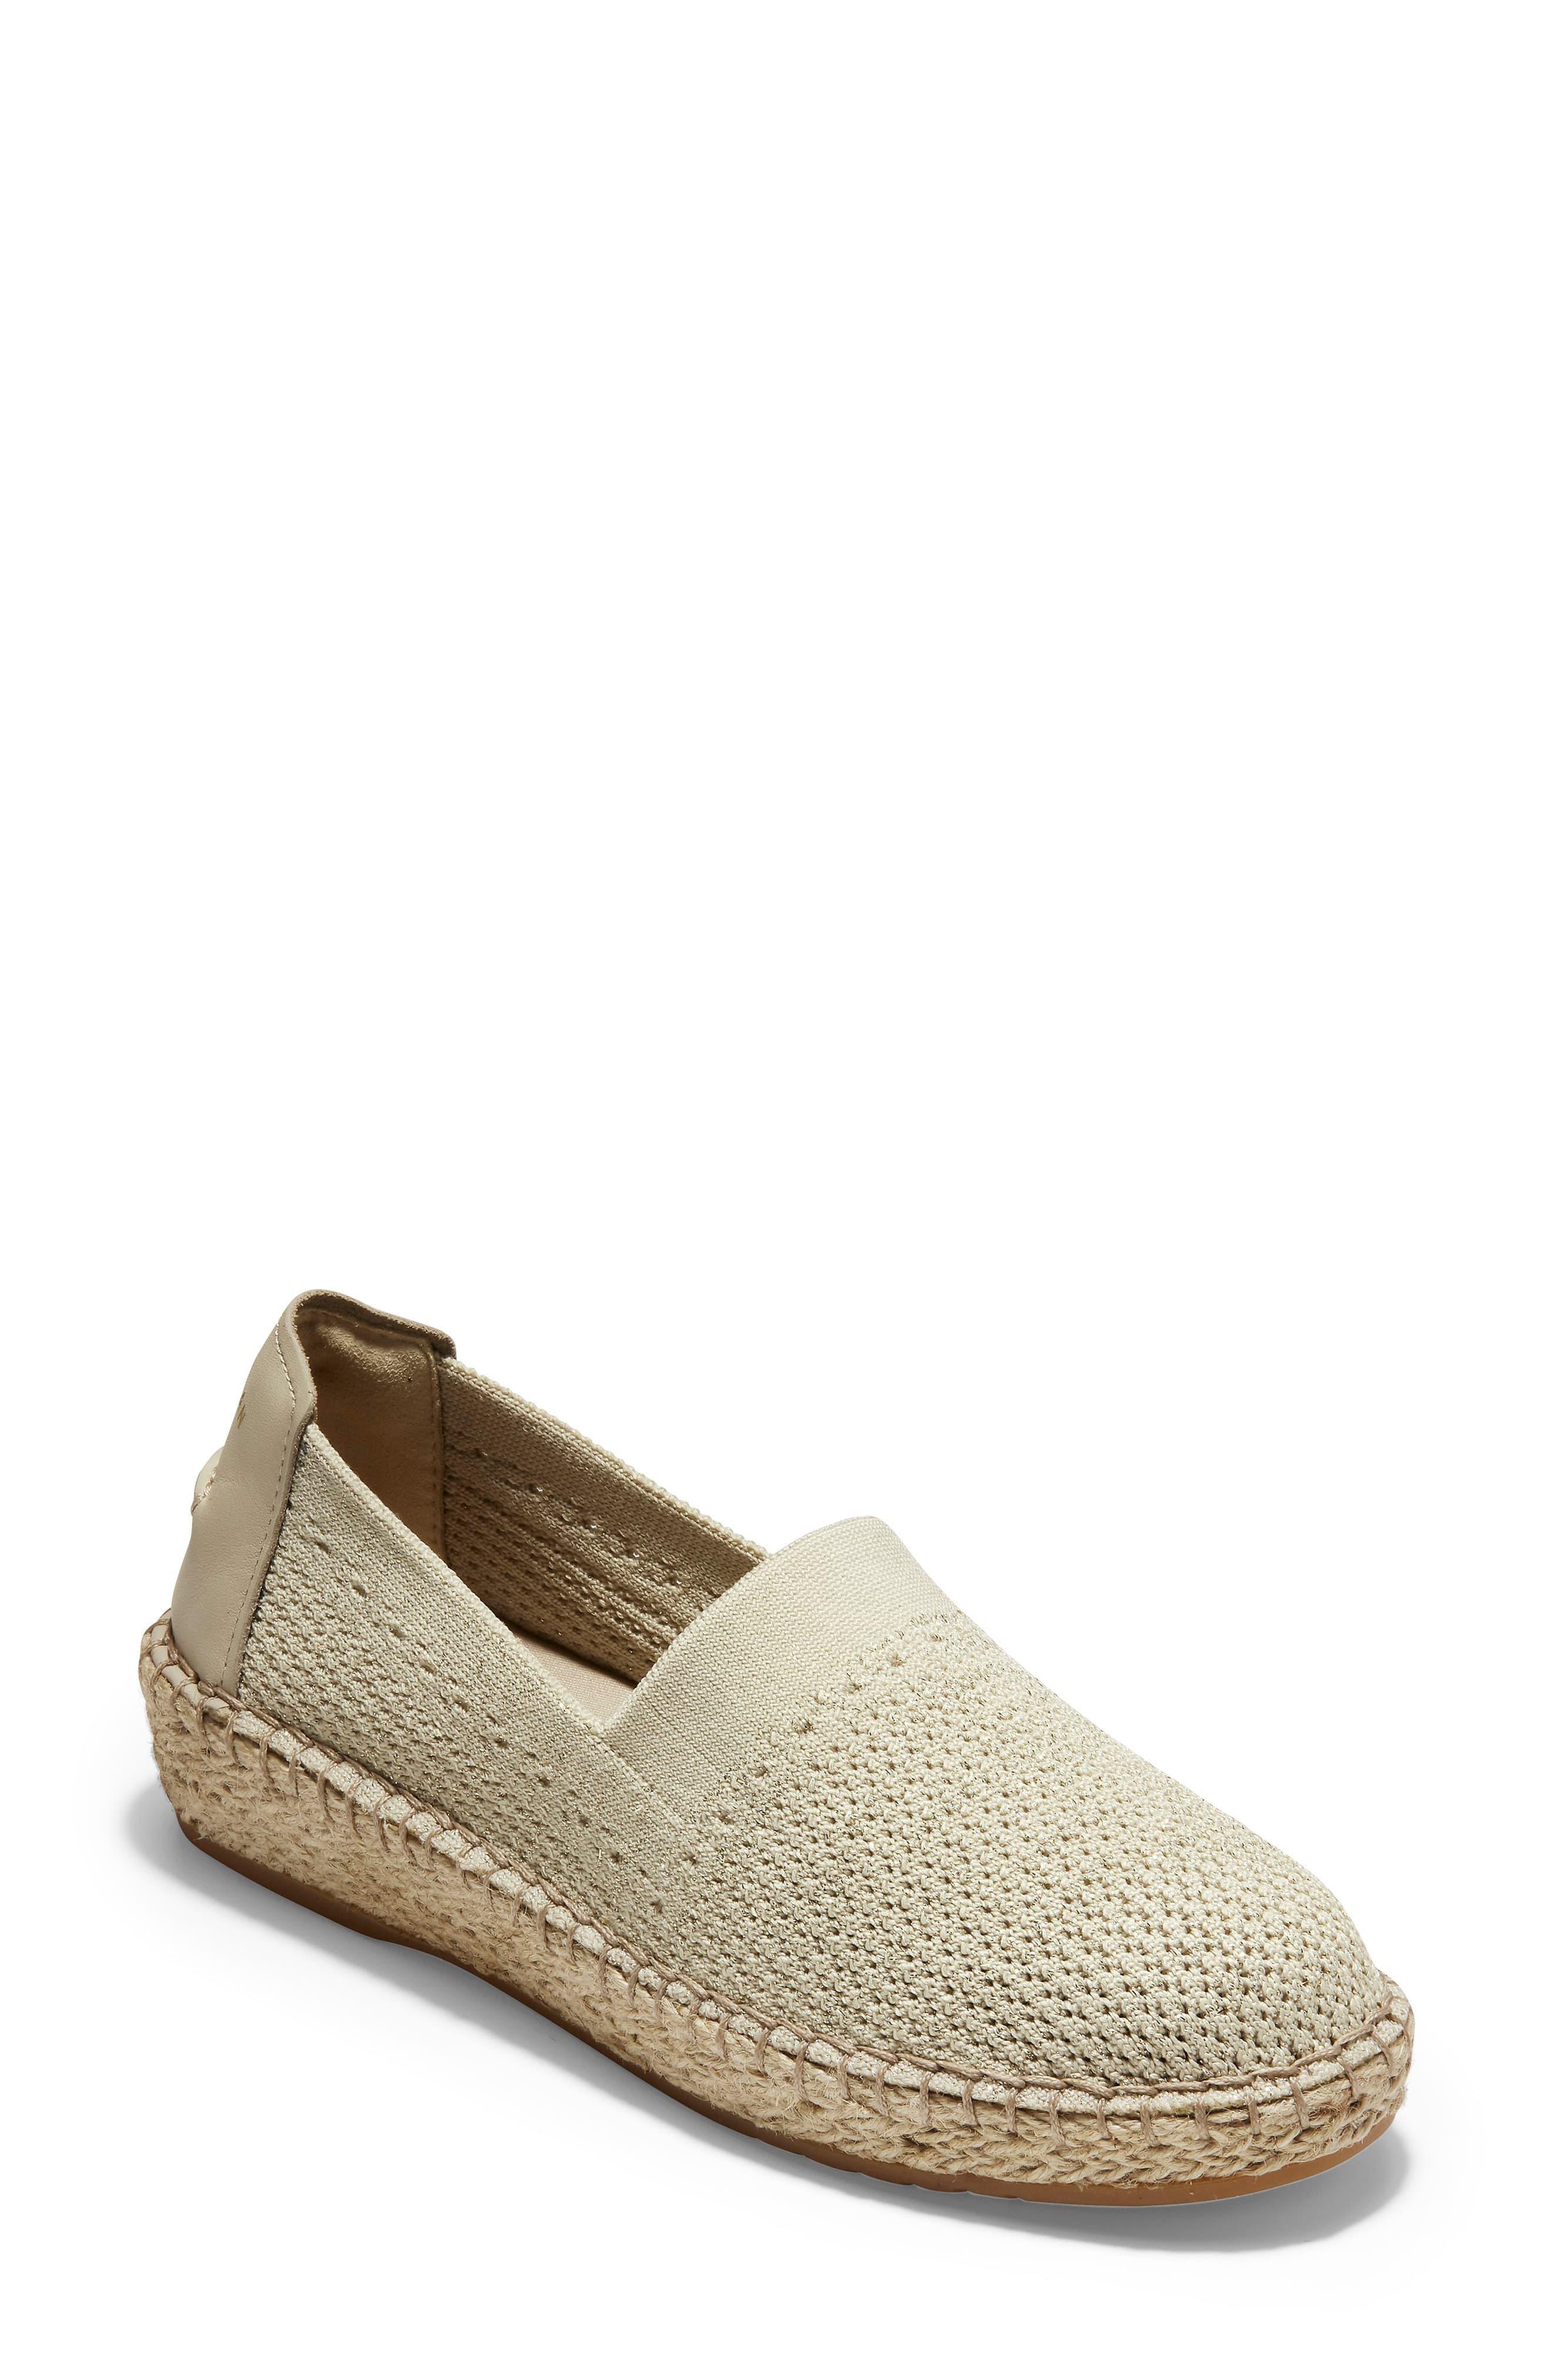 Cole Haan Cloudfeel Stitchlite Espadrille - Lyst